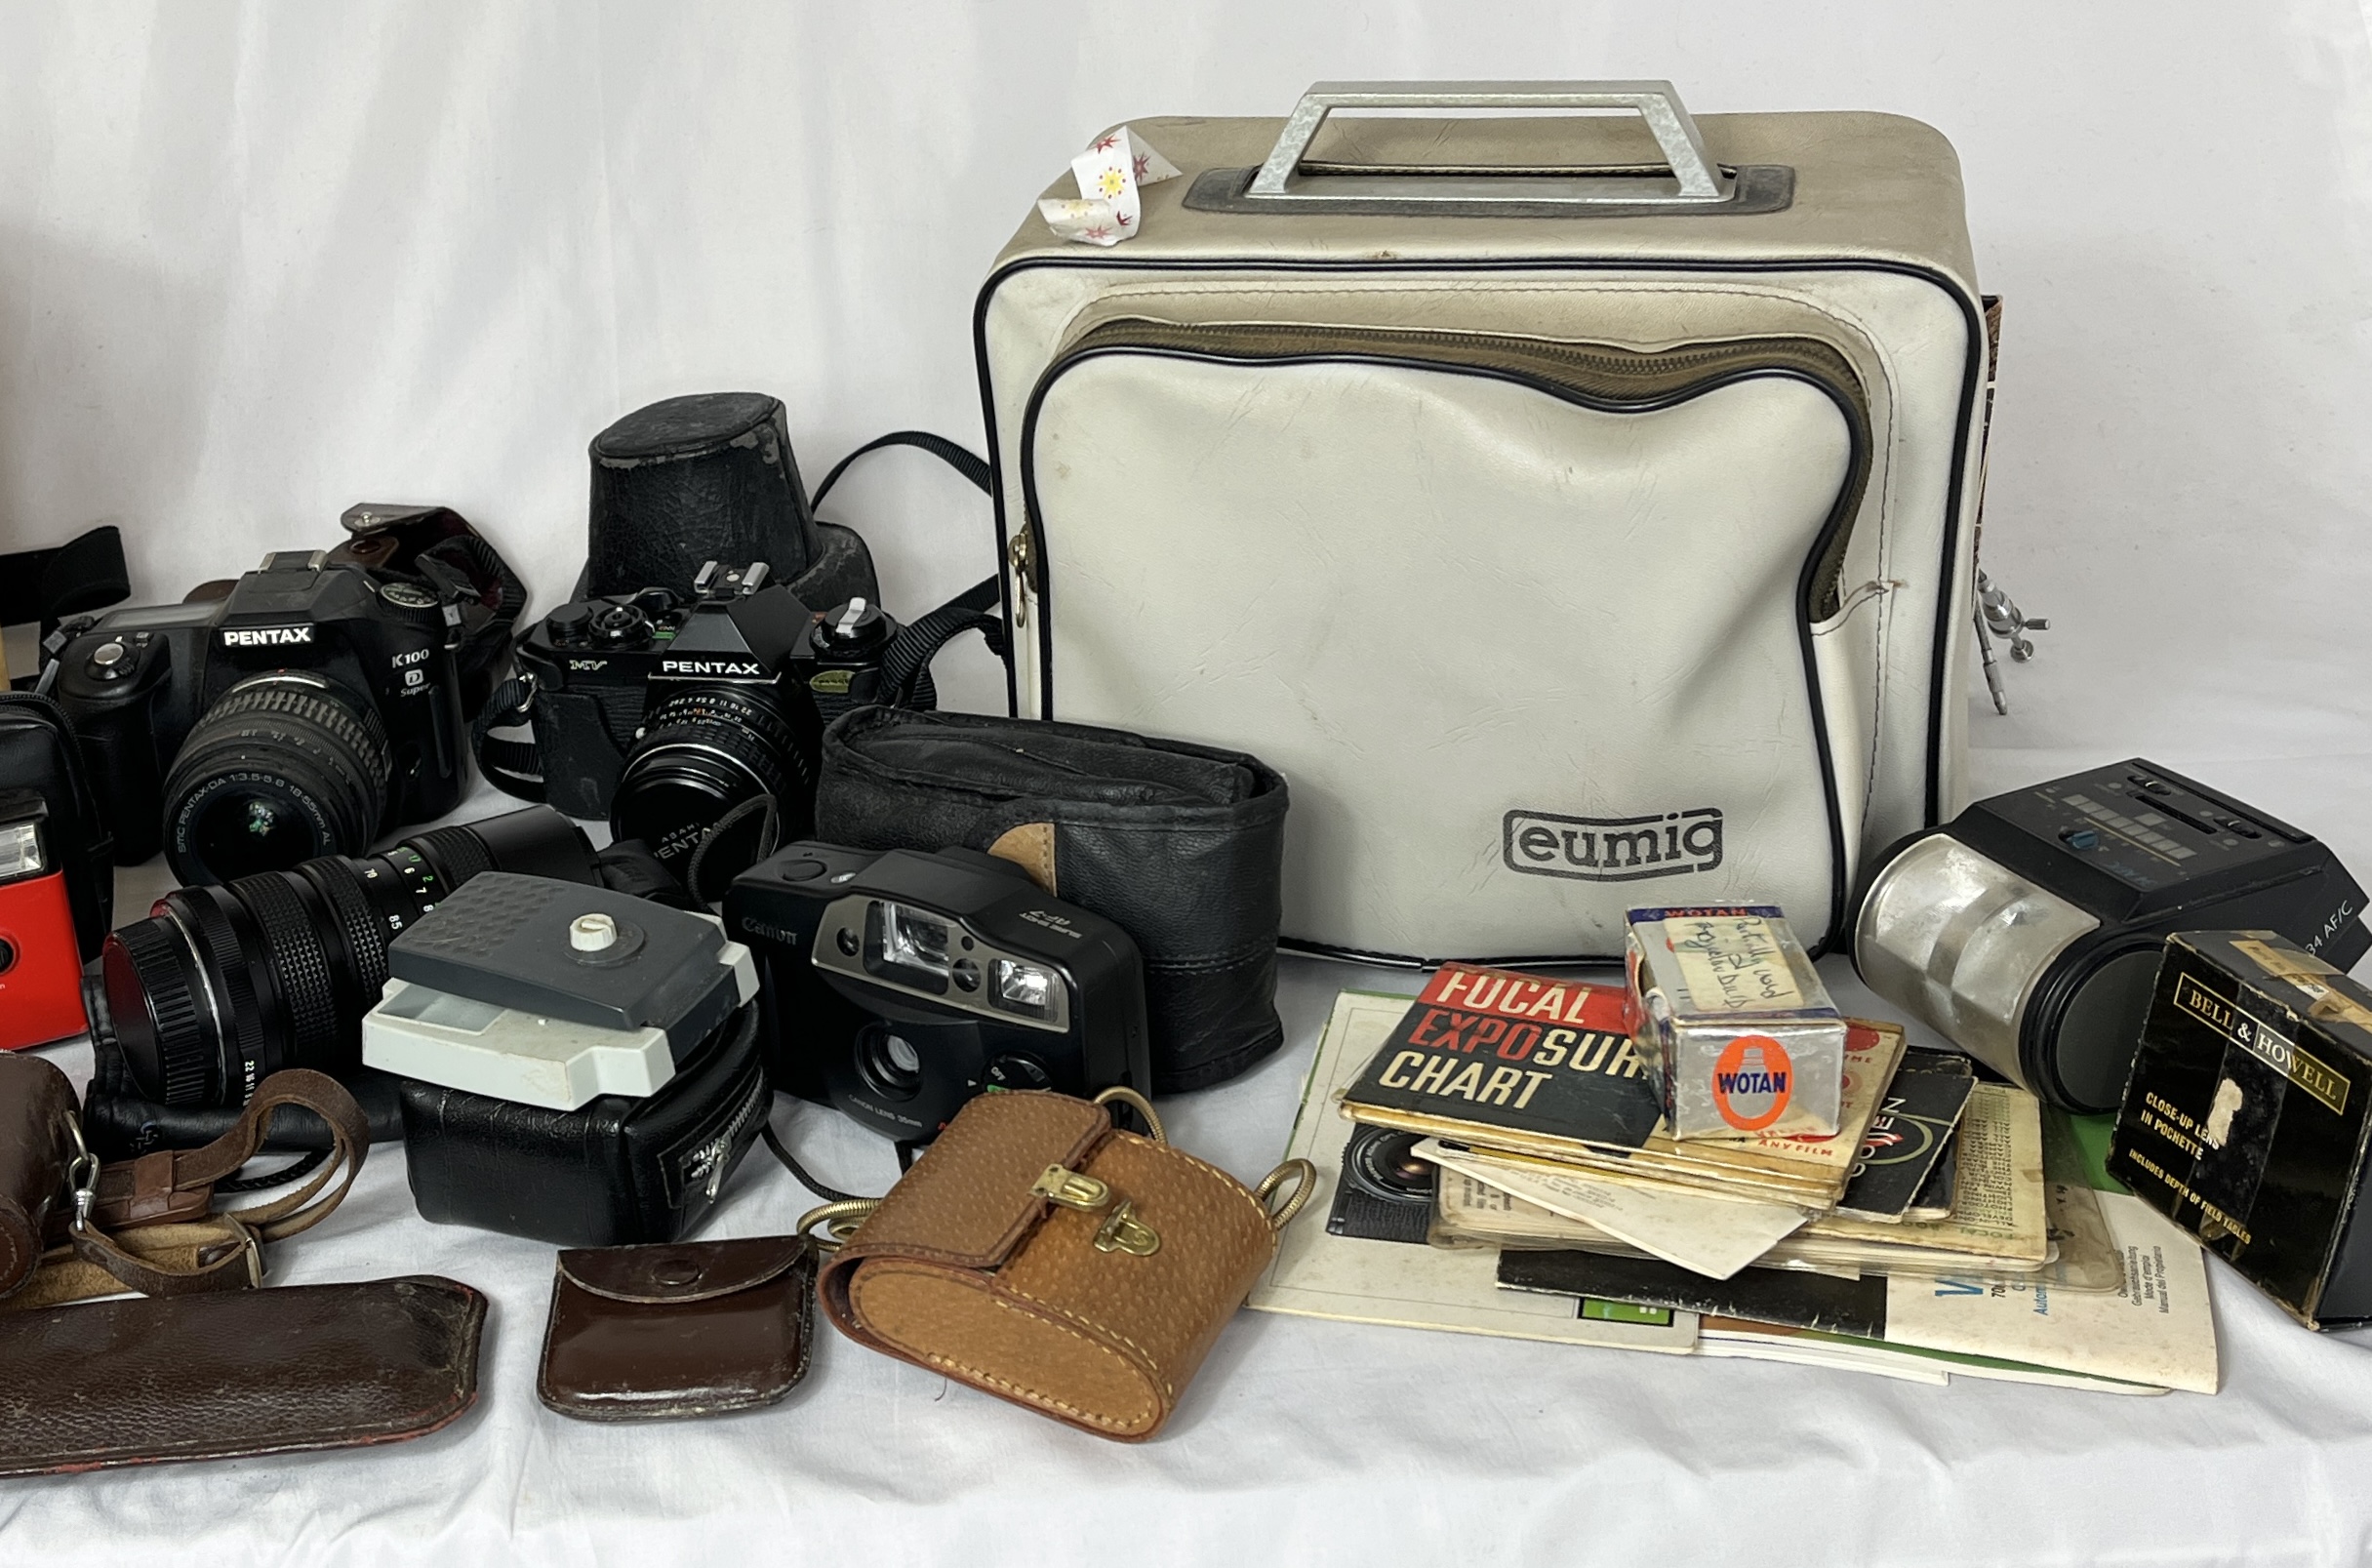 A collection of vintage cameras and camera equipment including Konica Pop, Pentax, Eumig etc. - Image 3 of 4